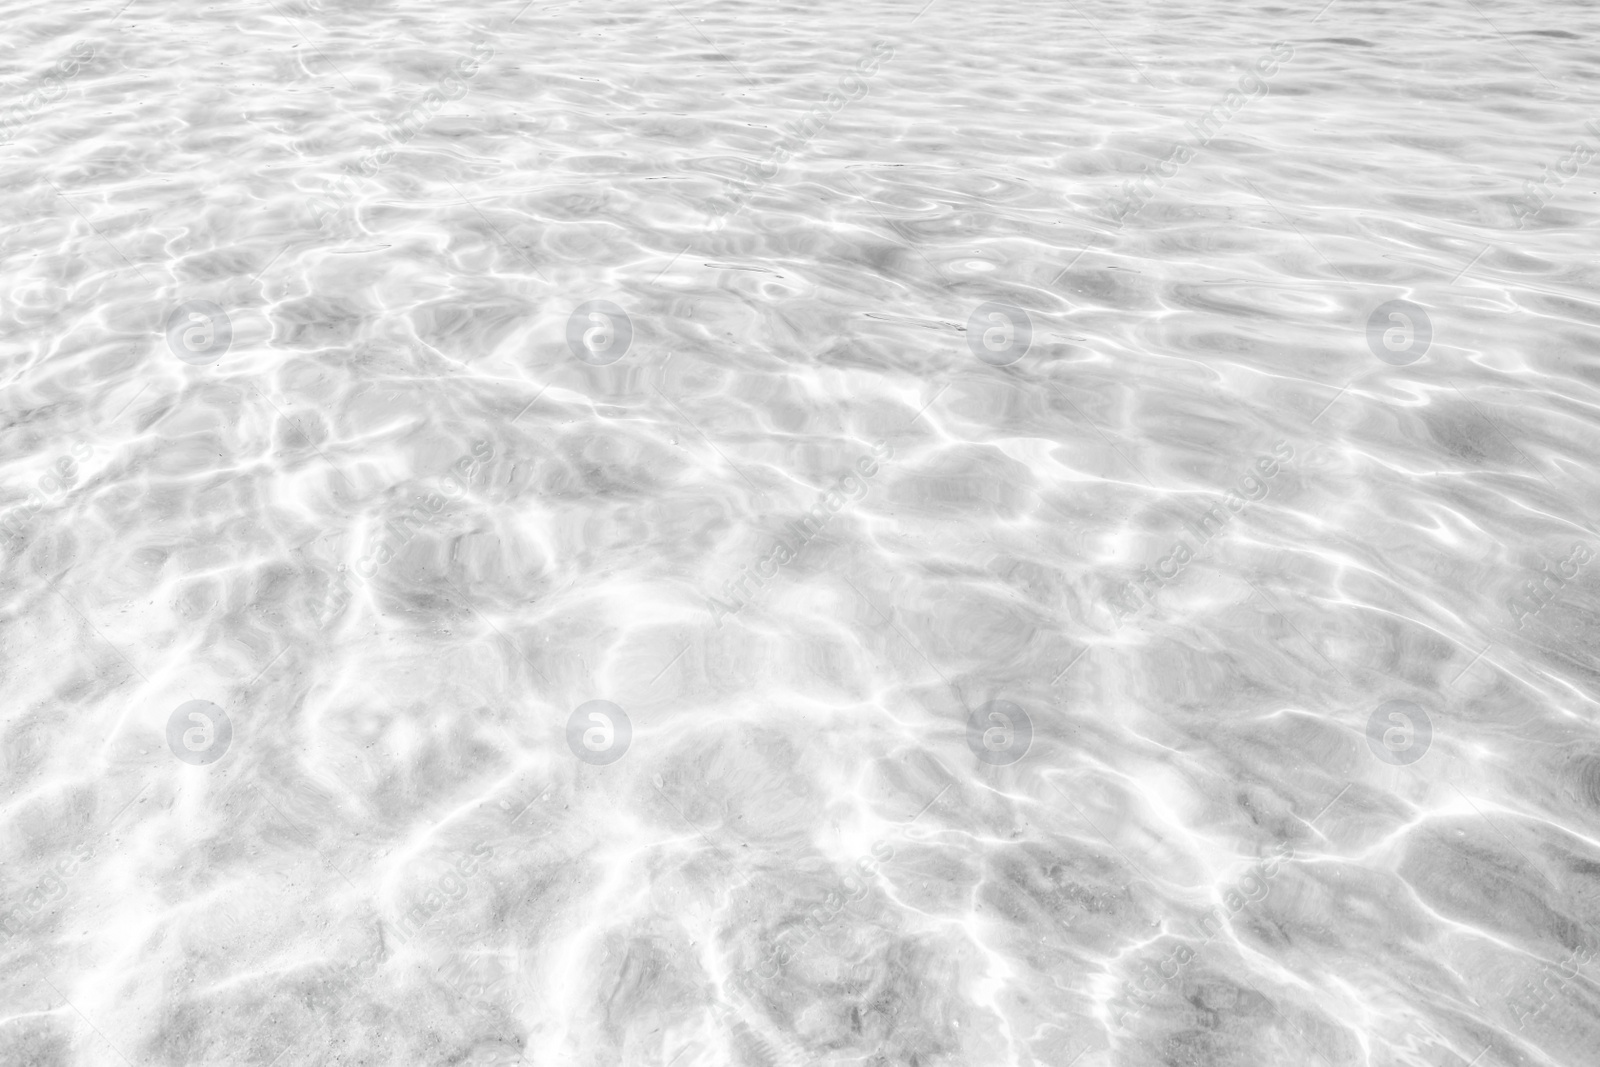 Image of View on ocean water with ripples and flecks